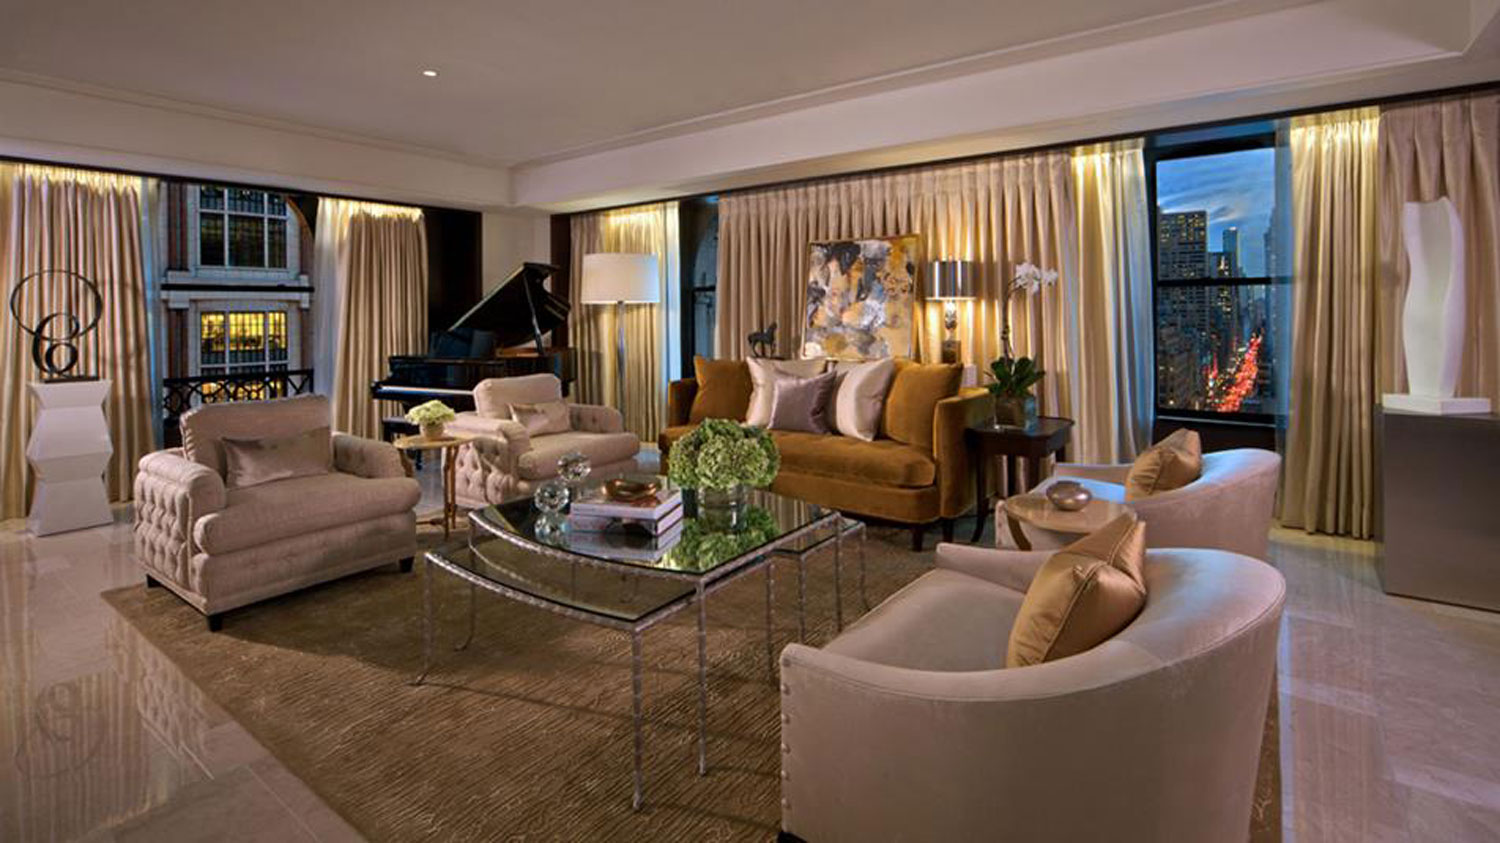 9 of the Most Expensive Hotel Suites in New York City - Galerie